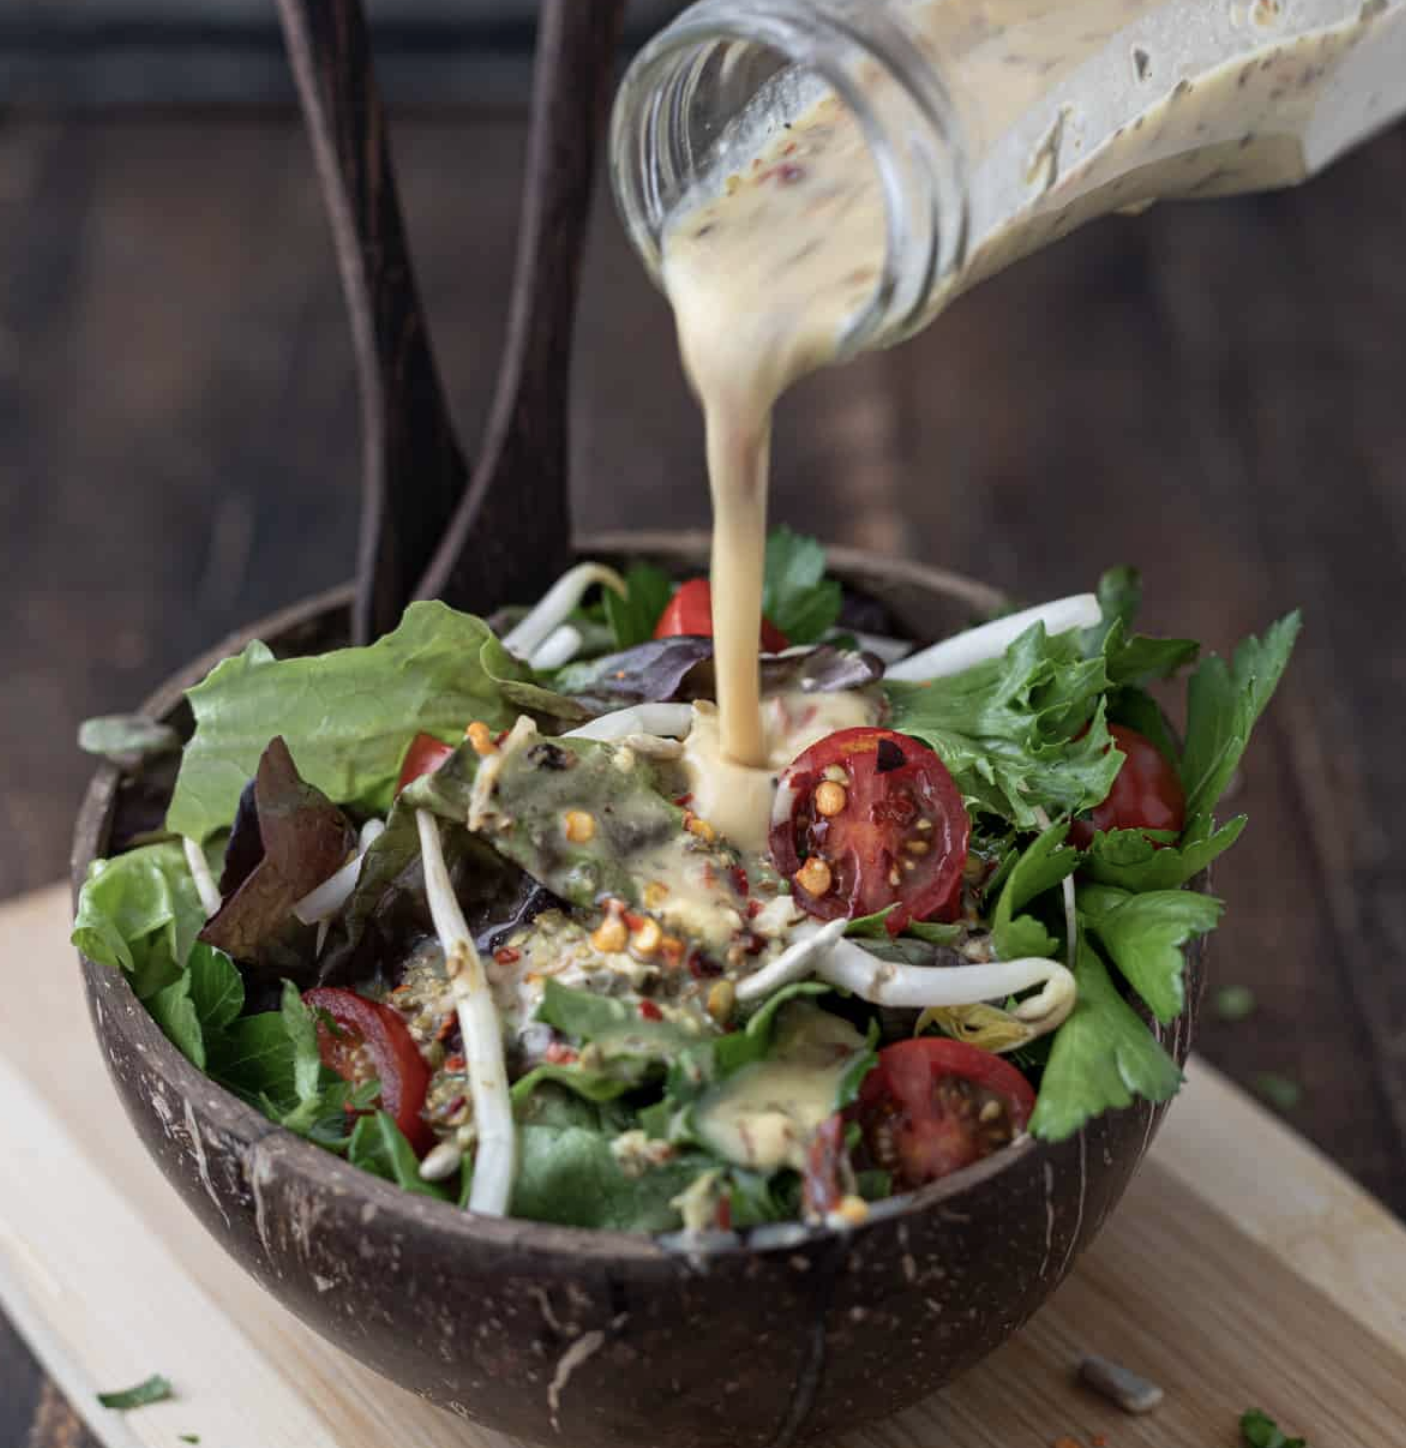 A quick and easy way anti-inflammatory salad + dressing [step by step]